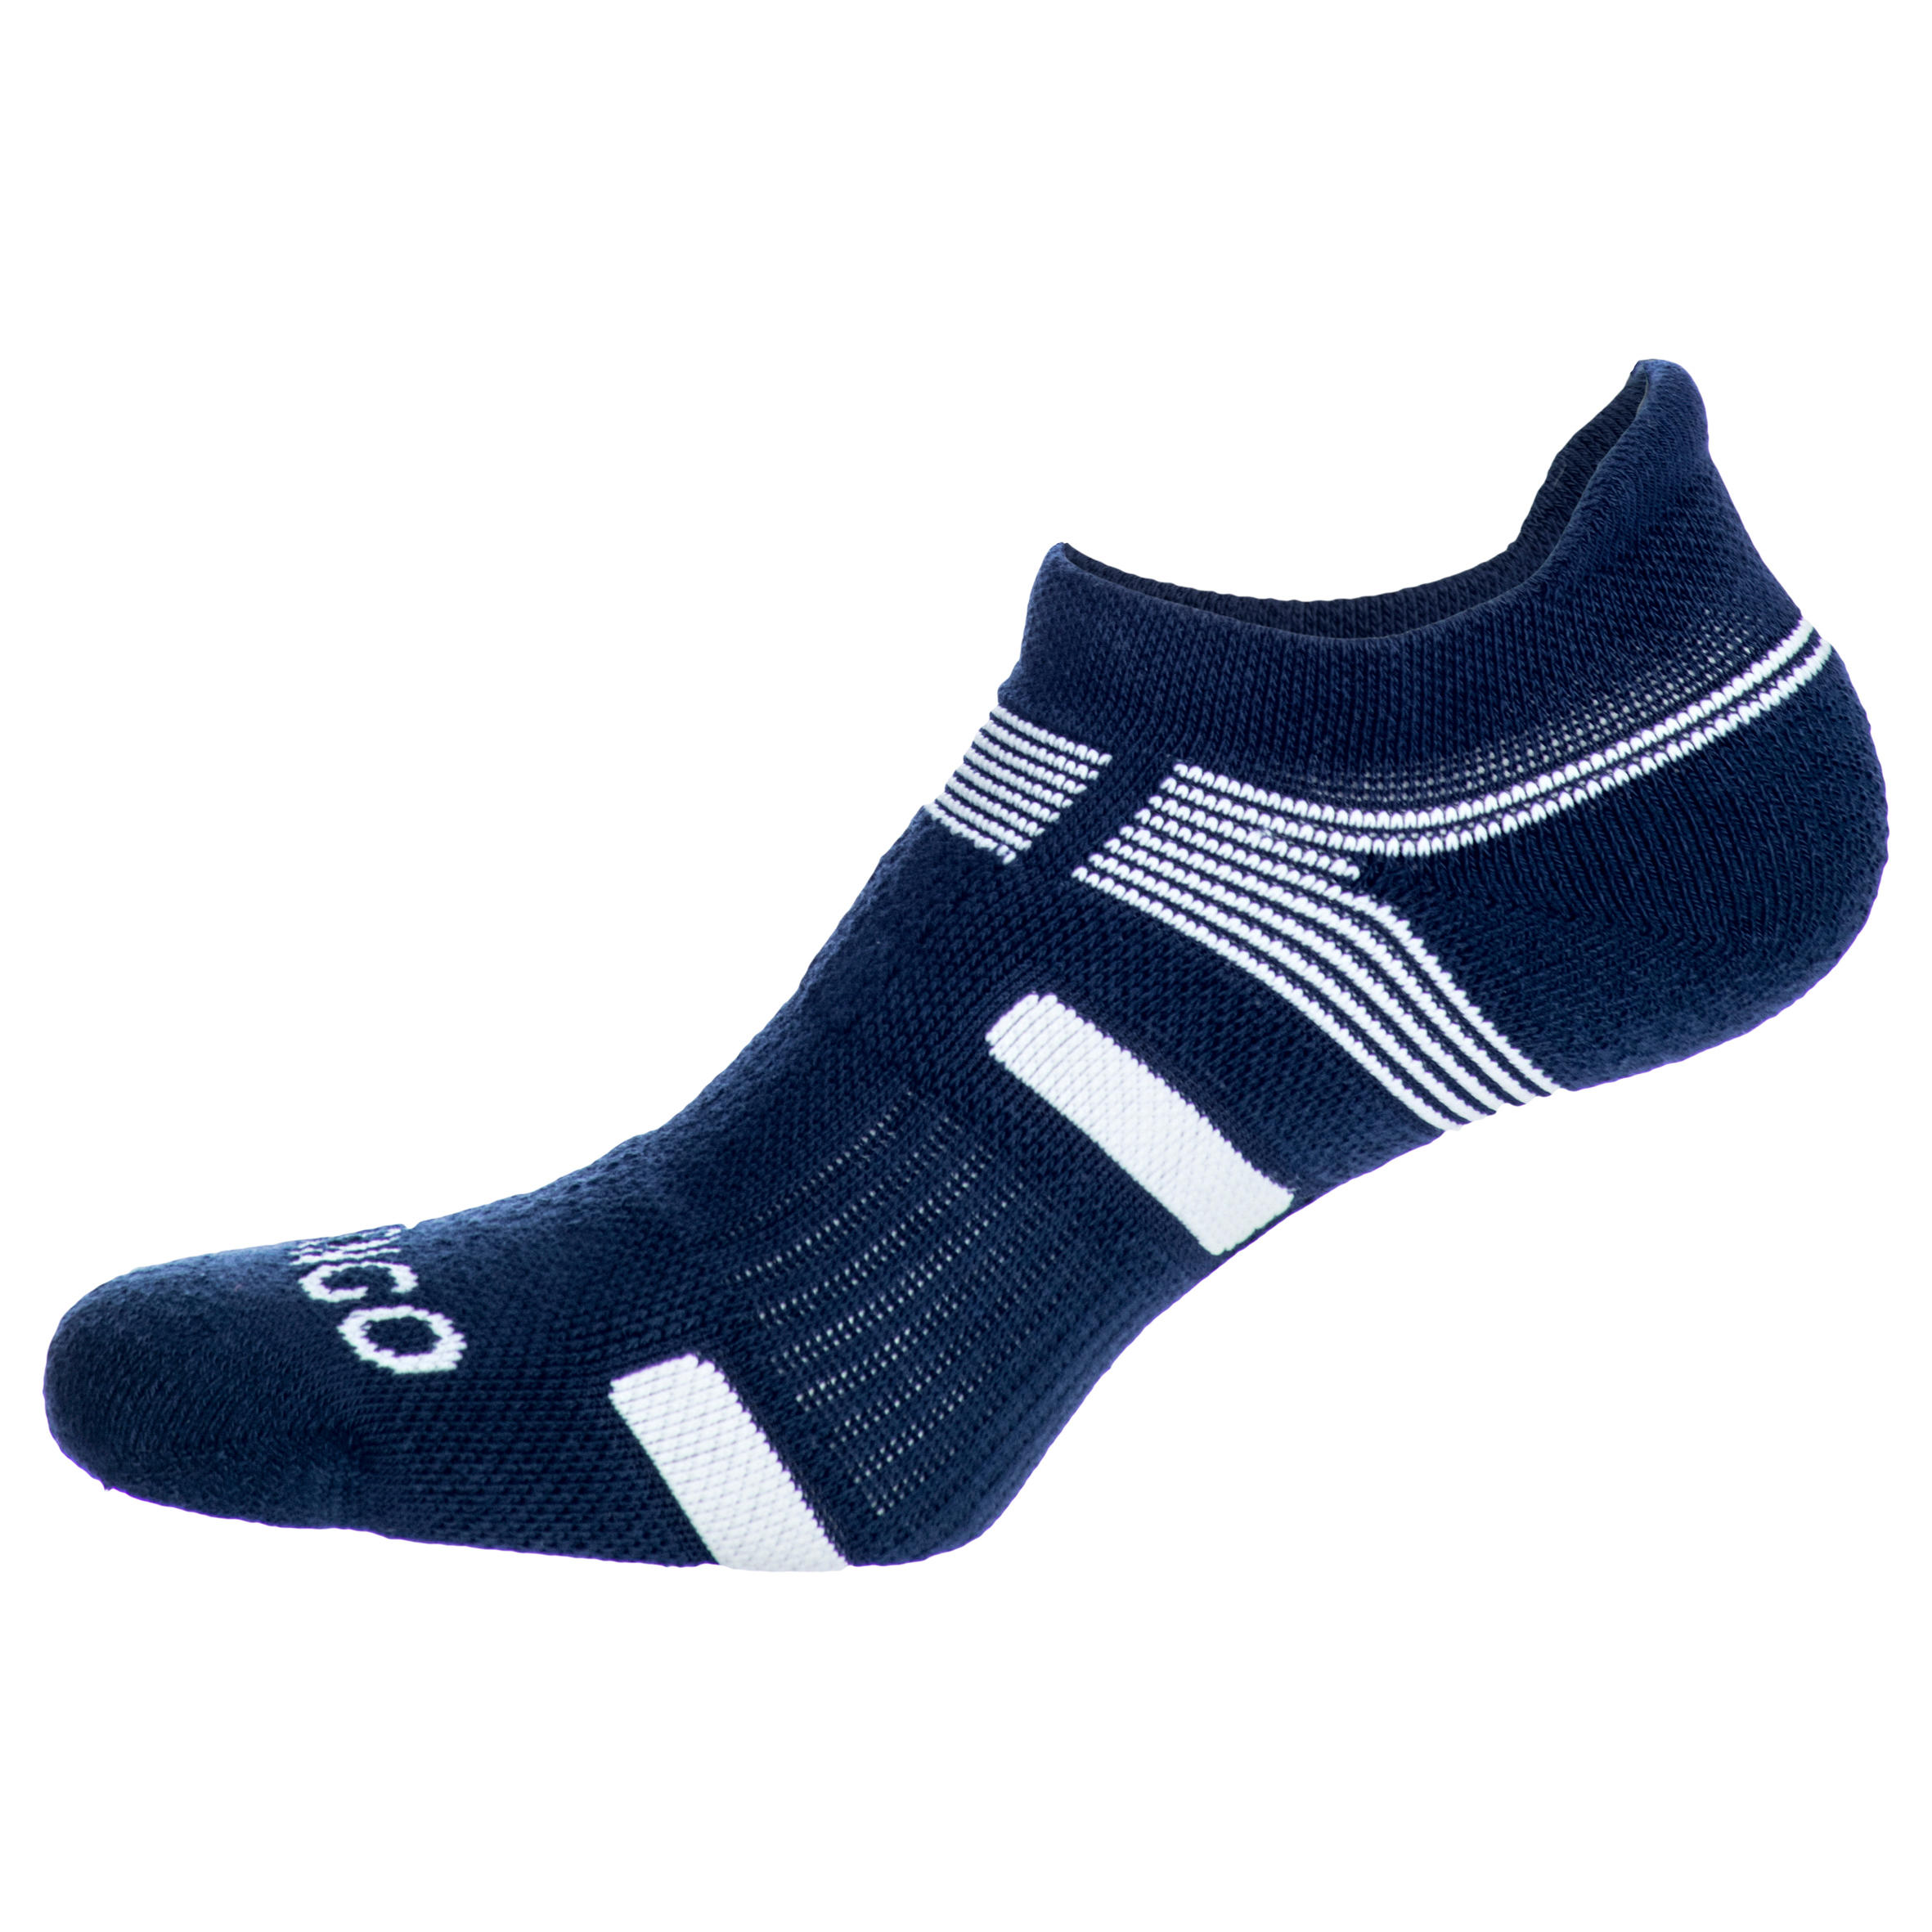 Low Sports Socks RS 560 Tri-Pack - Navy/White 7/12